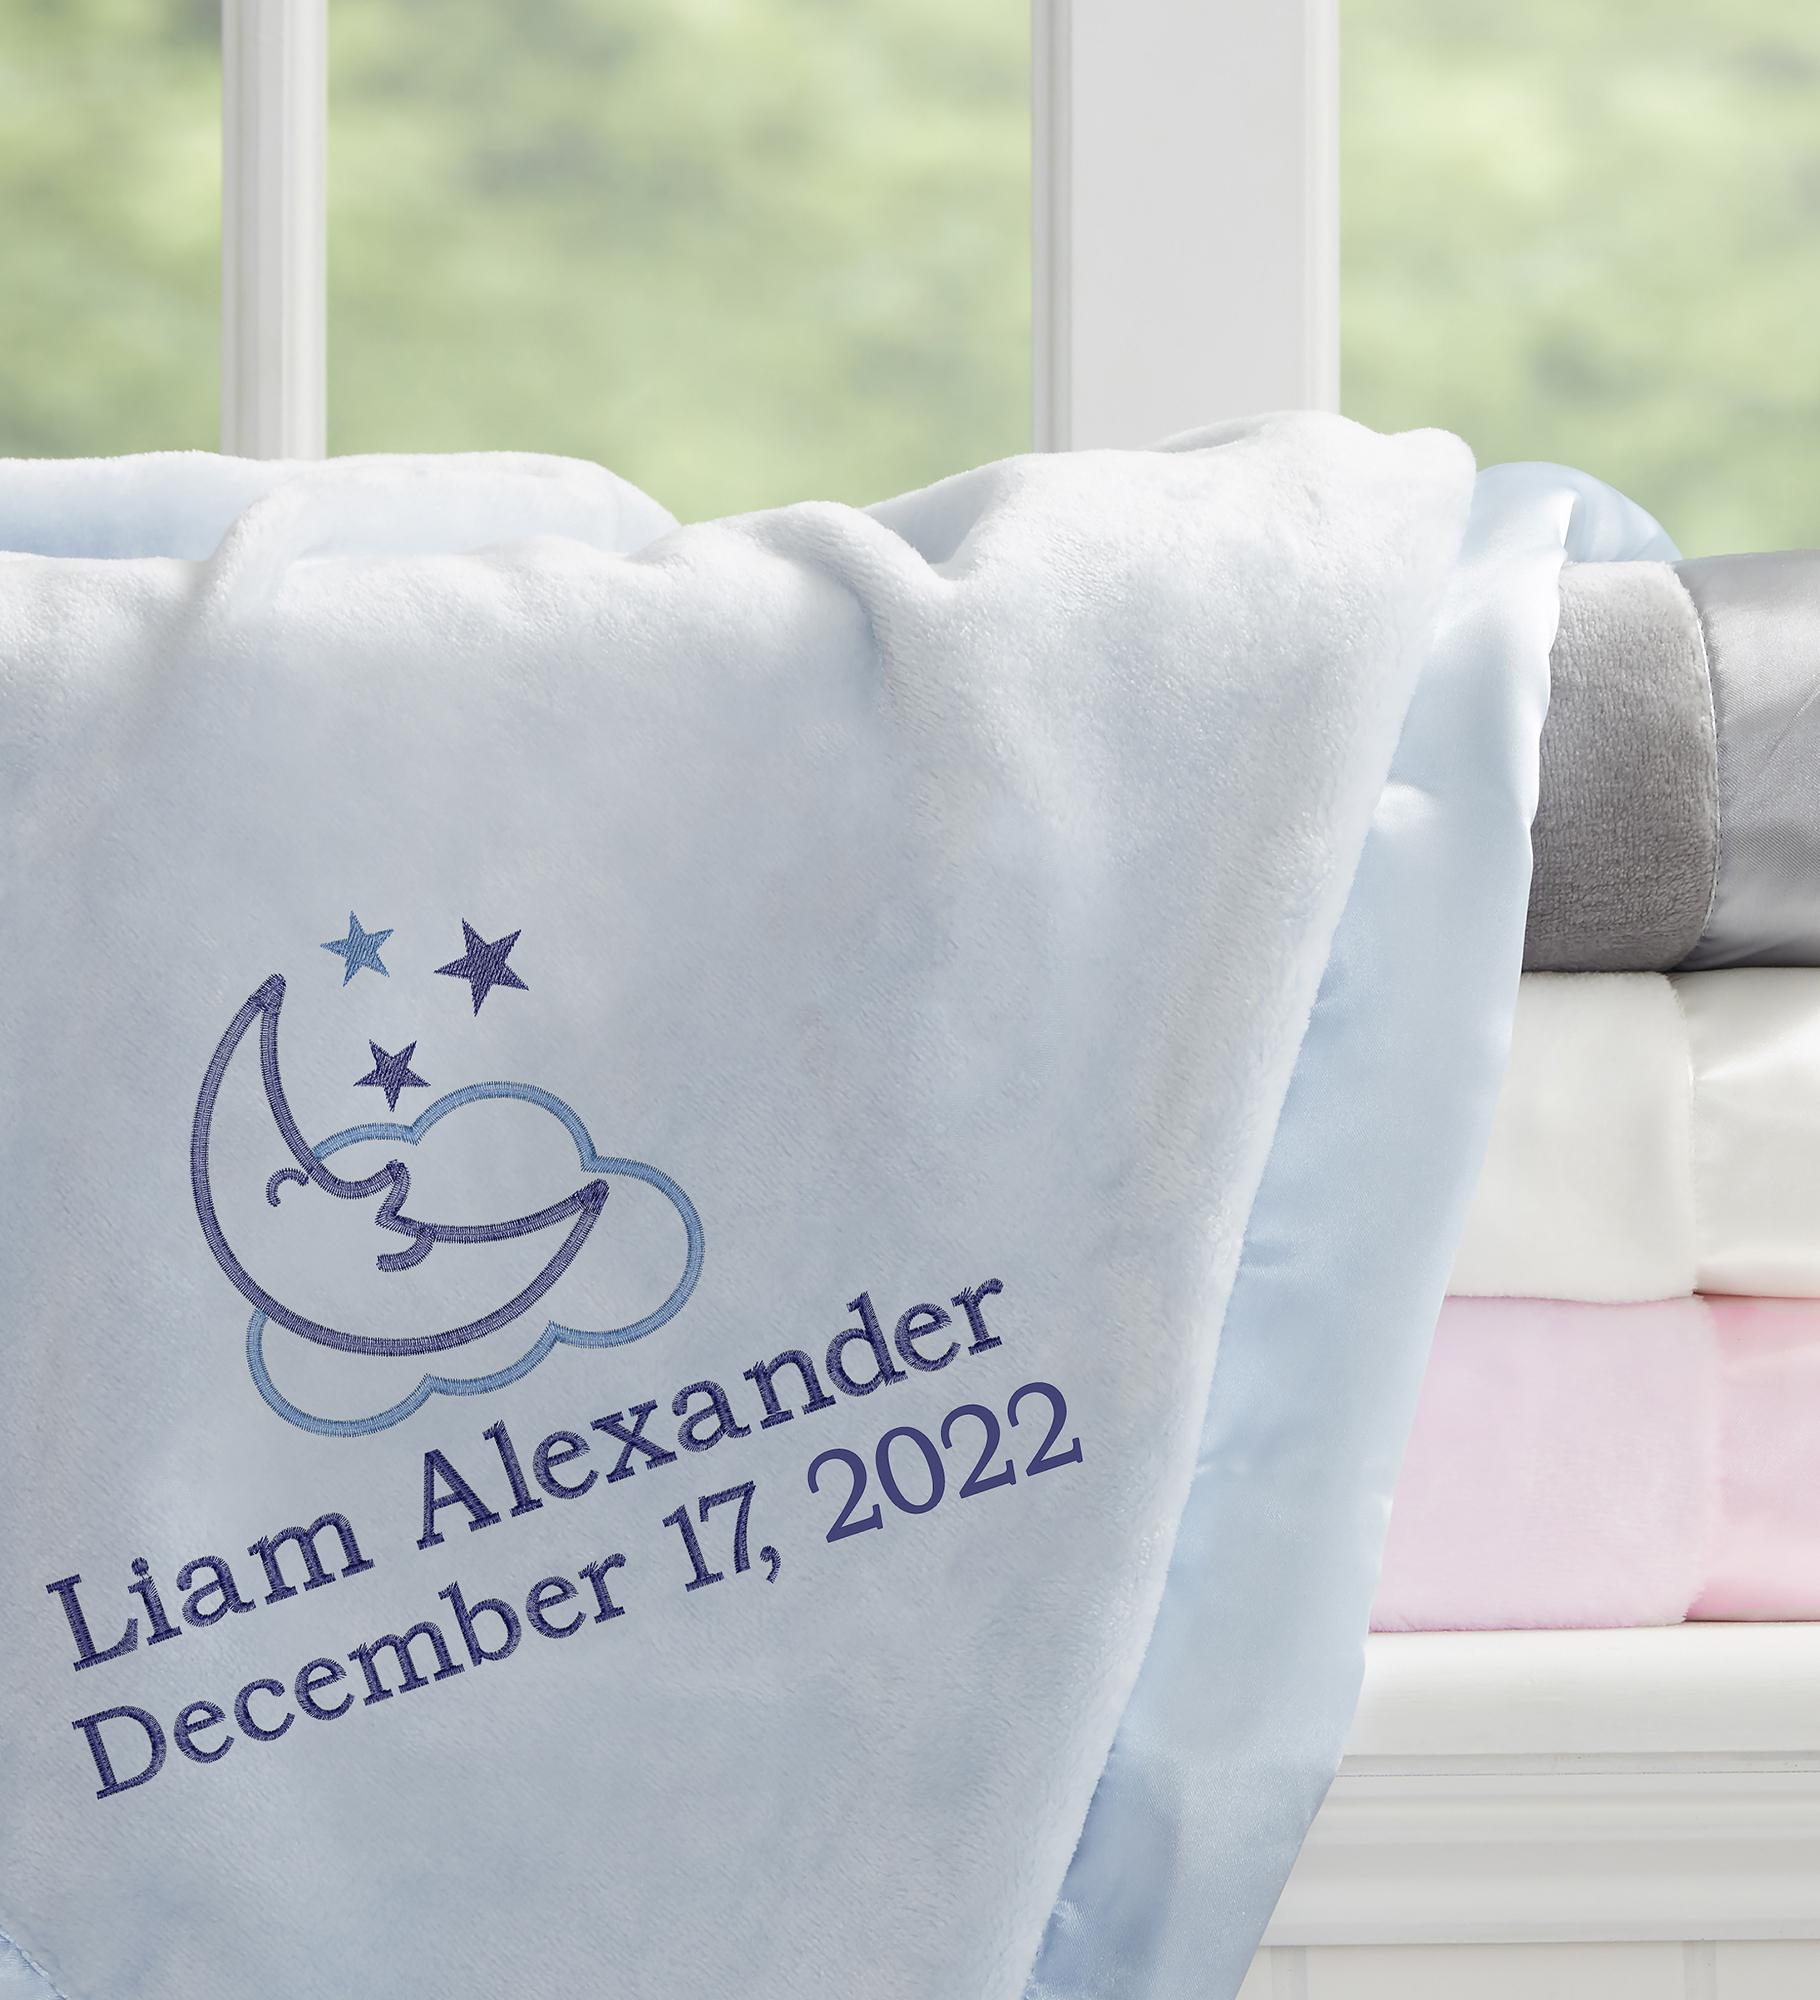 What Size Should A Fleece Baby Blanket Be